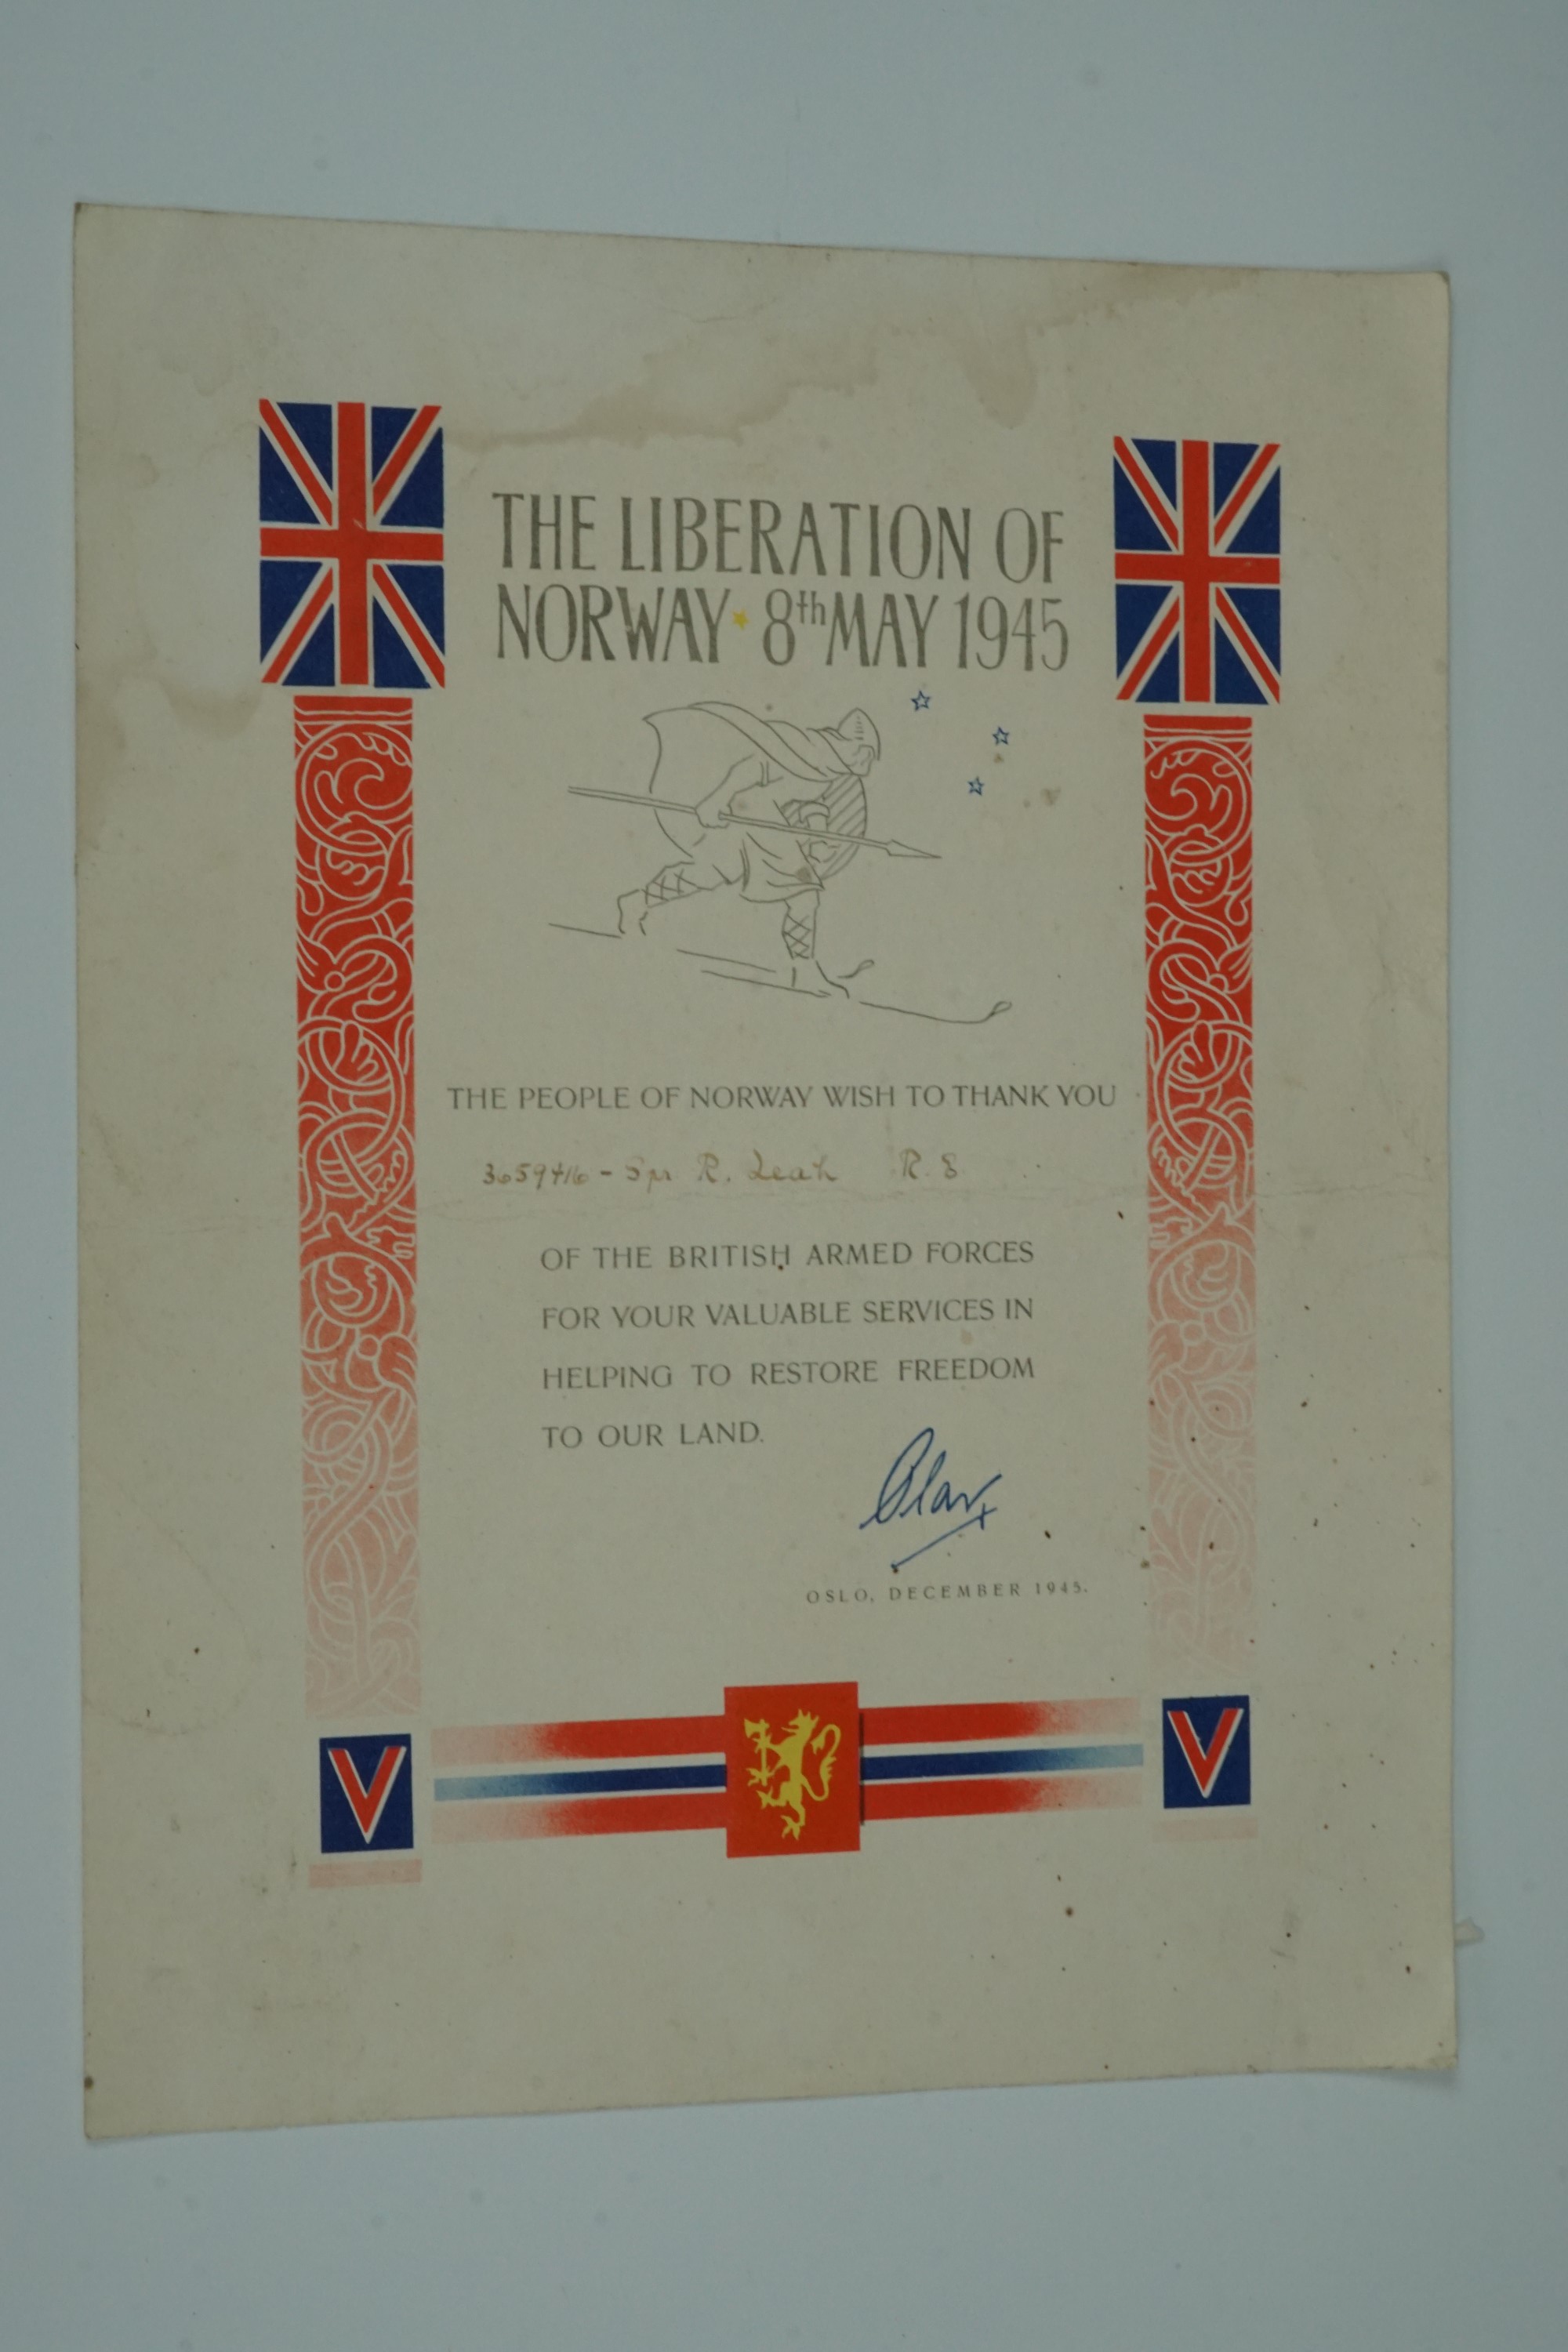 A 1945 Liberation of Norway certificate